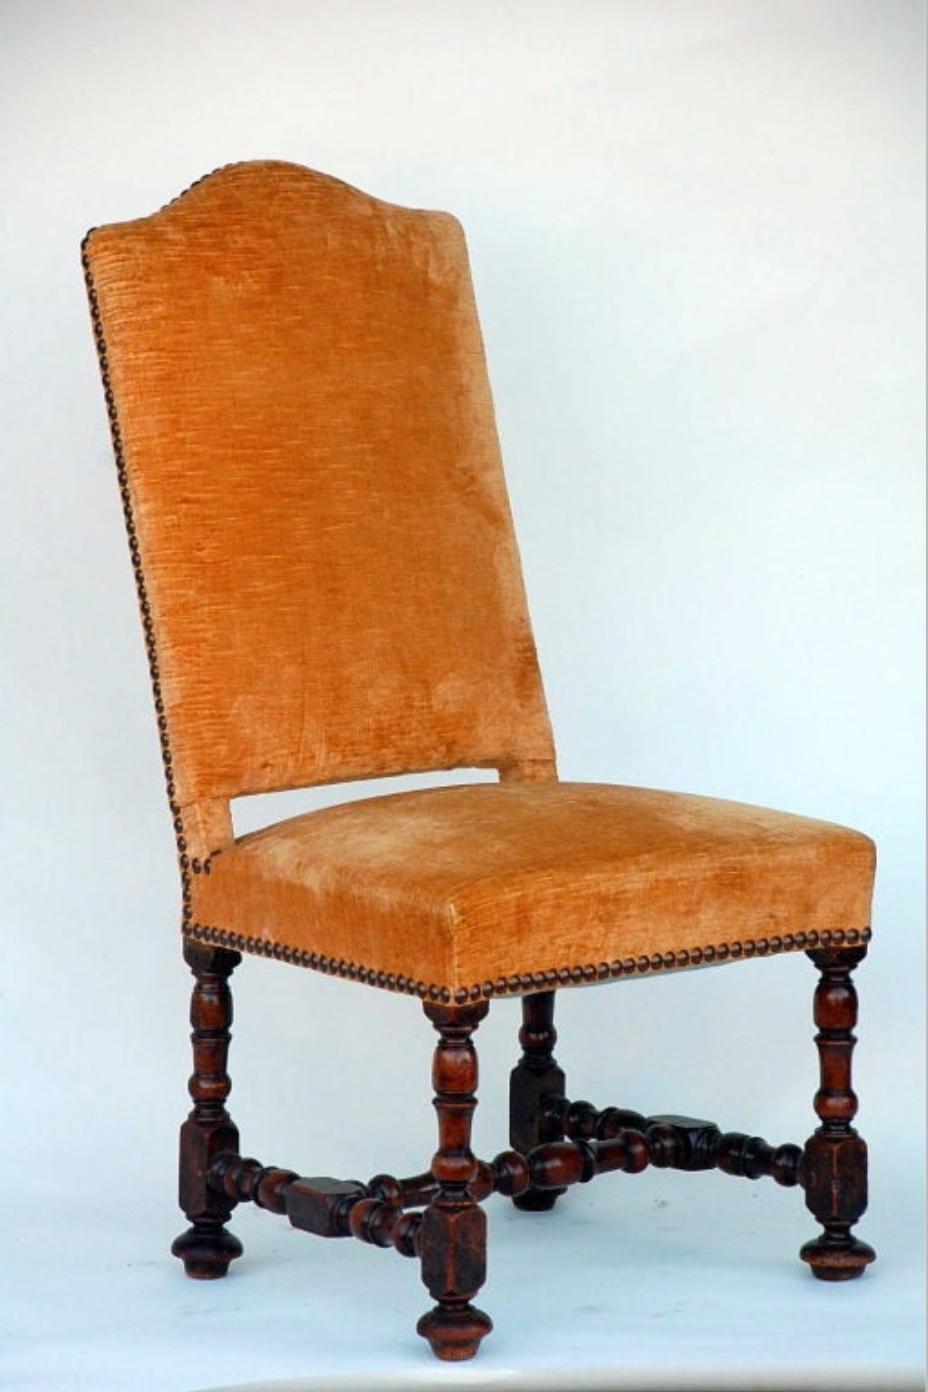 Large turned wood Baroque style chair.